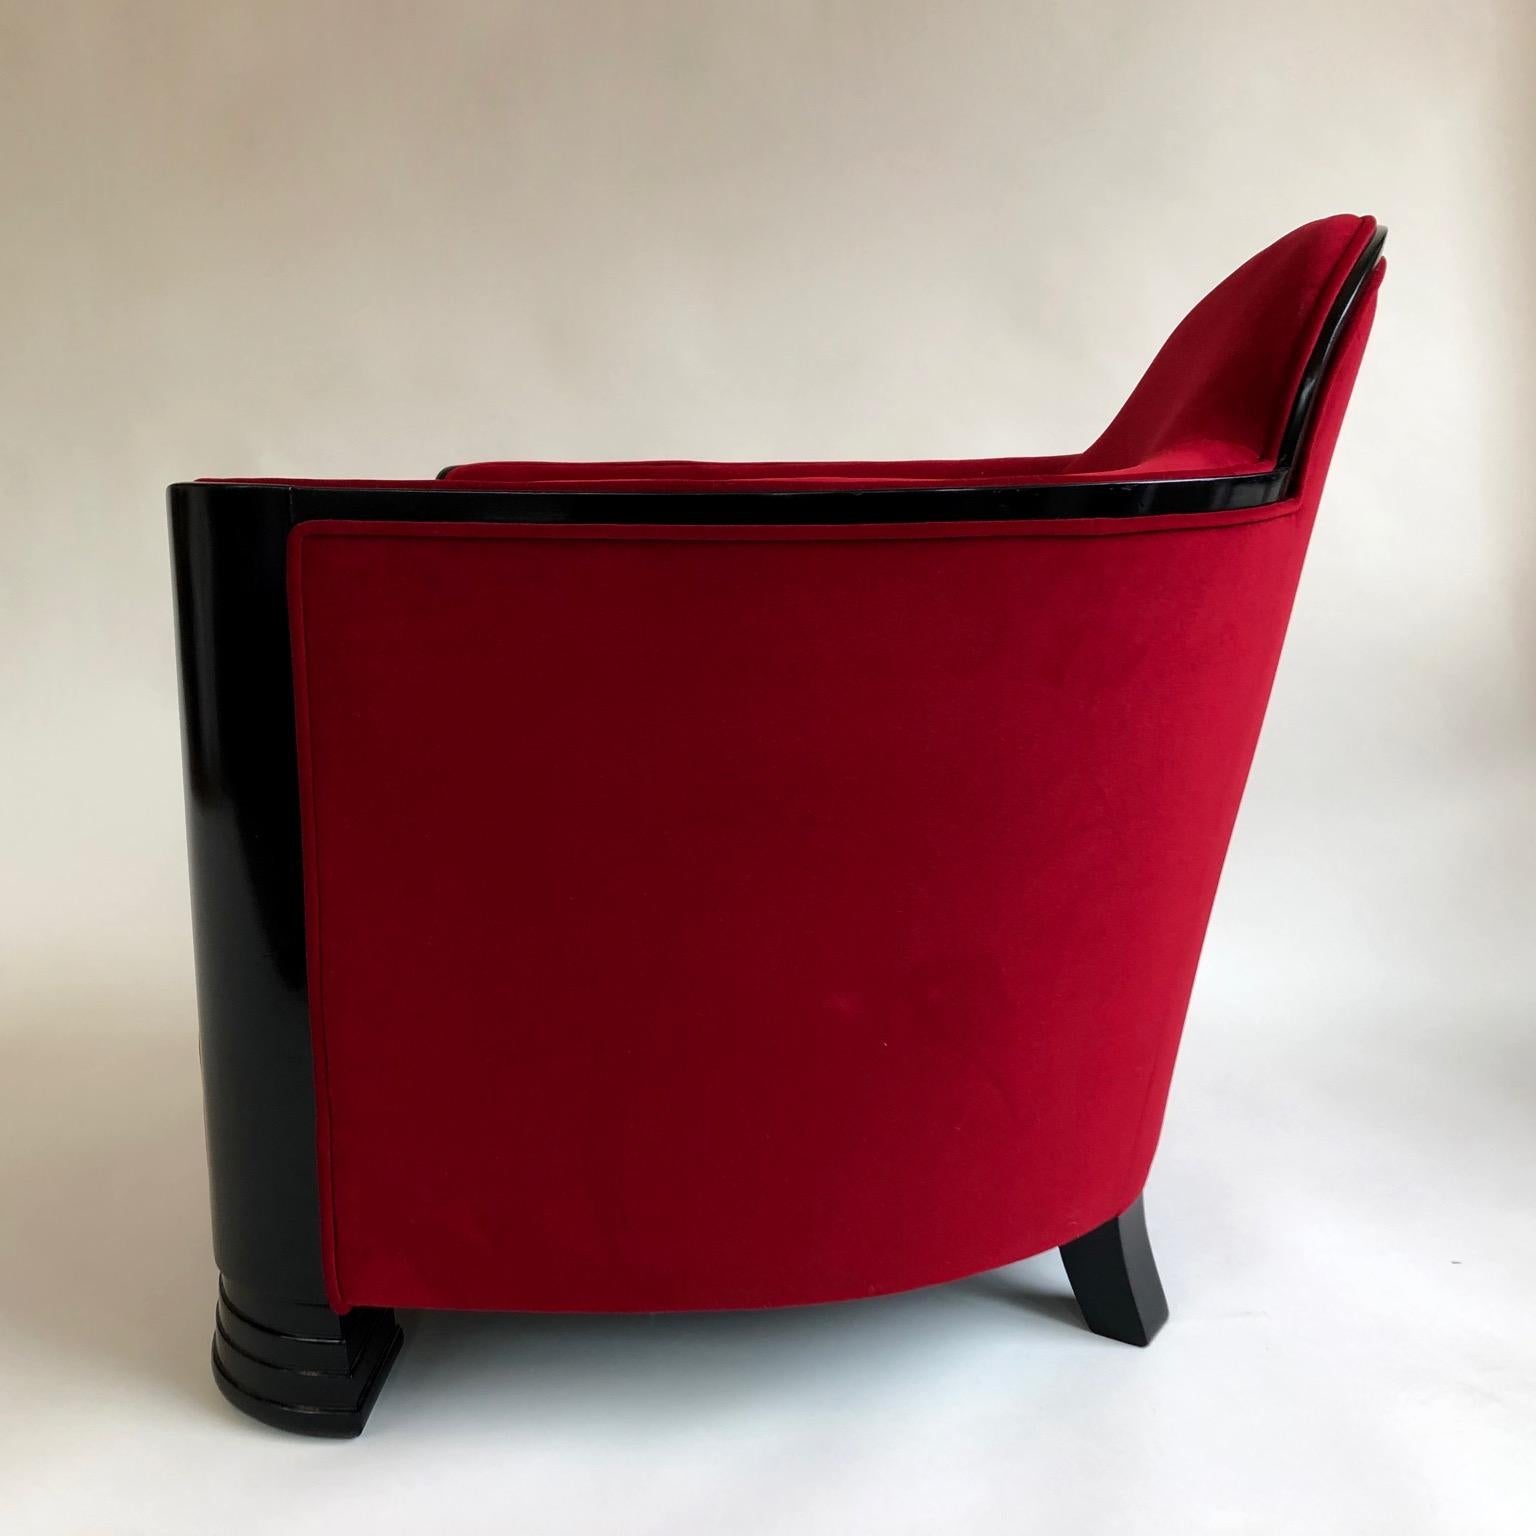 20th Century Black and Red Art Deco Modernist Pair of Armchairs, Club Chairs, France, 1930s